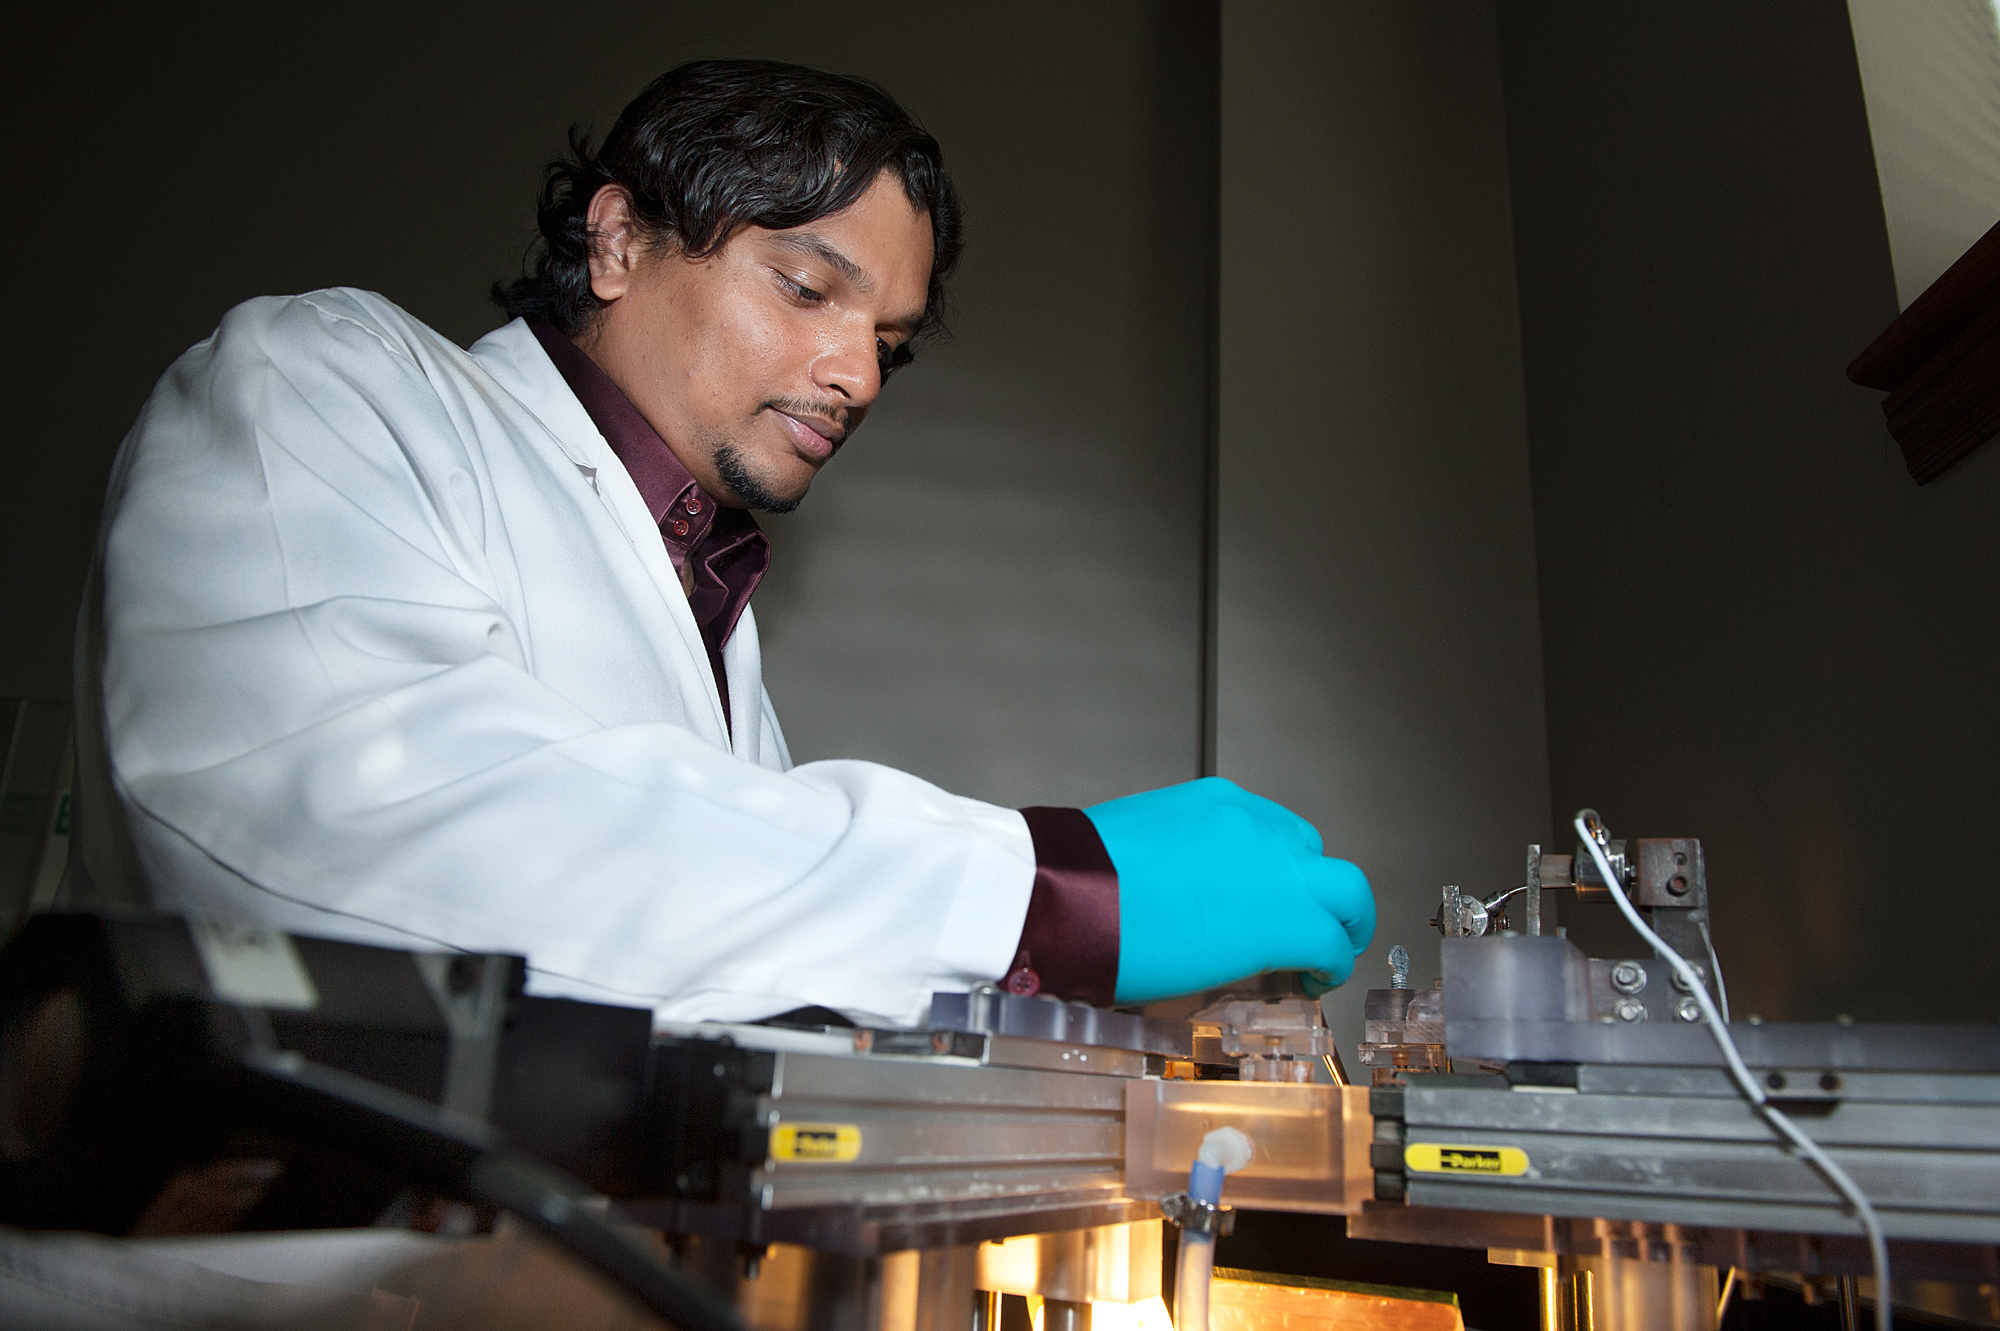 Sourav Patnaik uses the biaxial machine in the Agricultural and Bioengineering lab to stretch sheep tissue and determine its viability. He recently won the prestigious Southeastern Microscopy Society Ruska Award in recognition of his research.